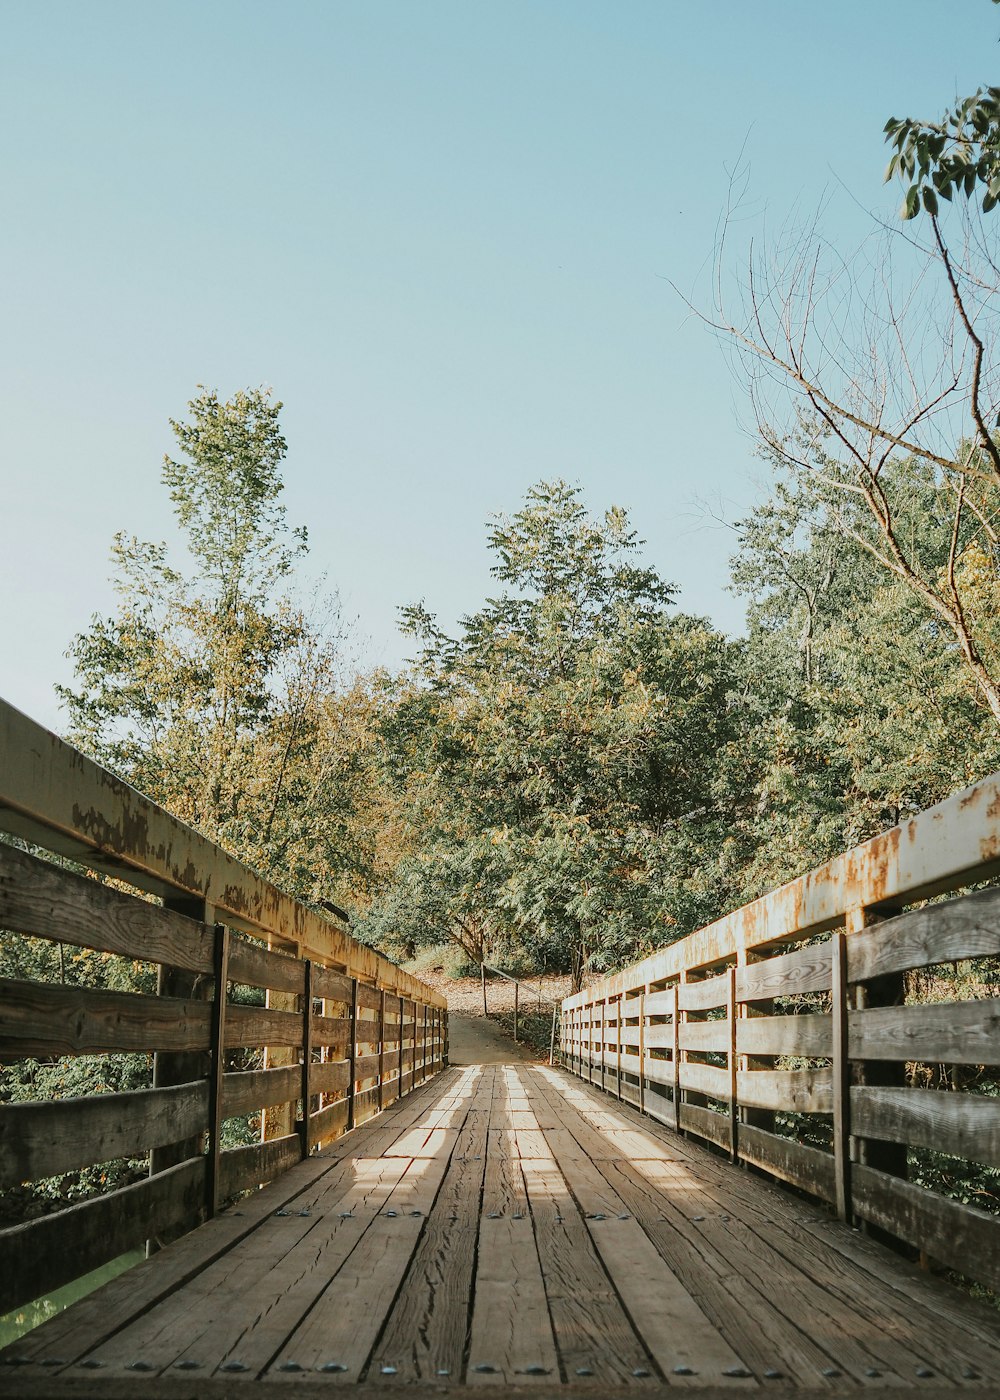 a long wooden bridge with trees in the background